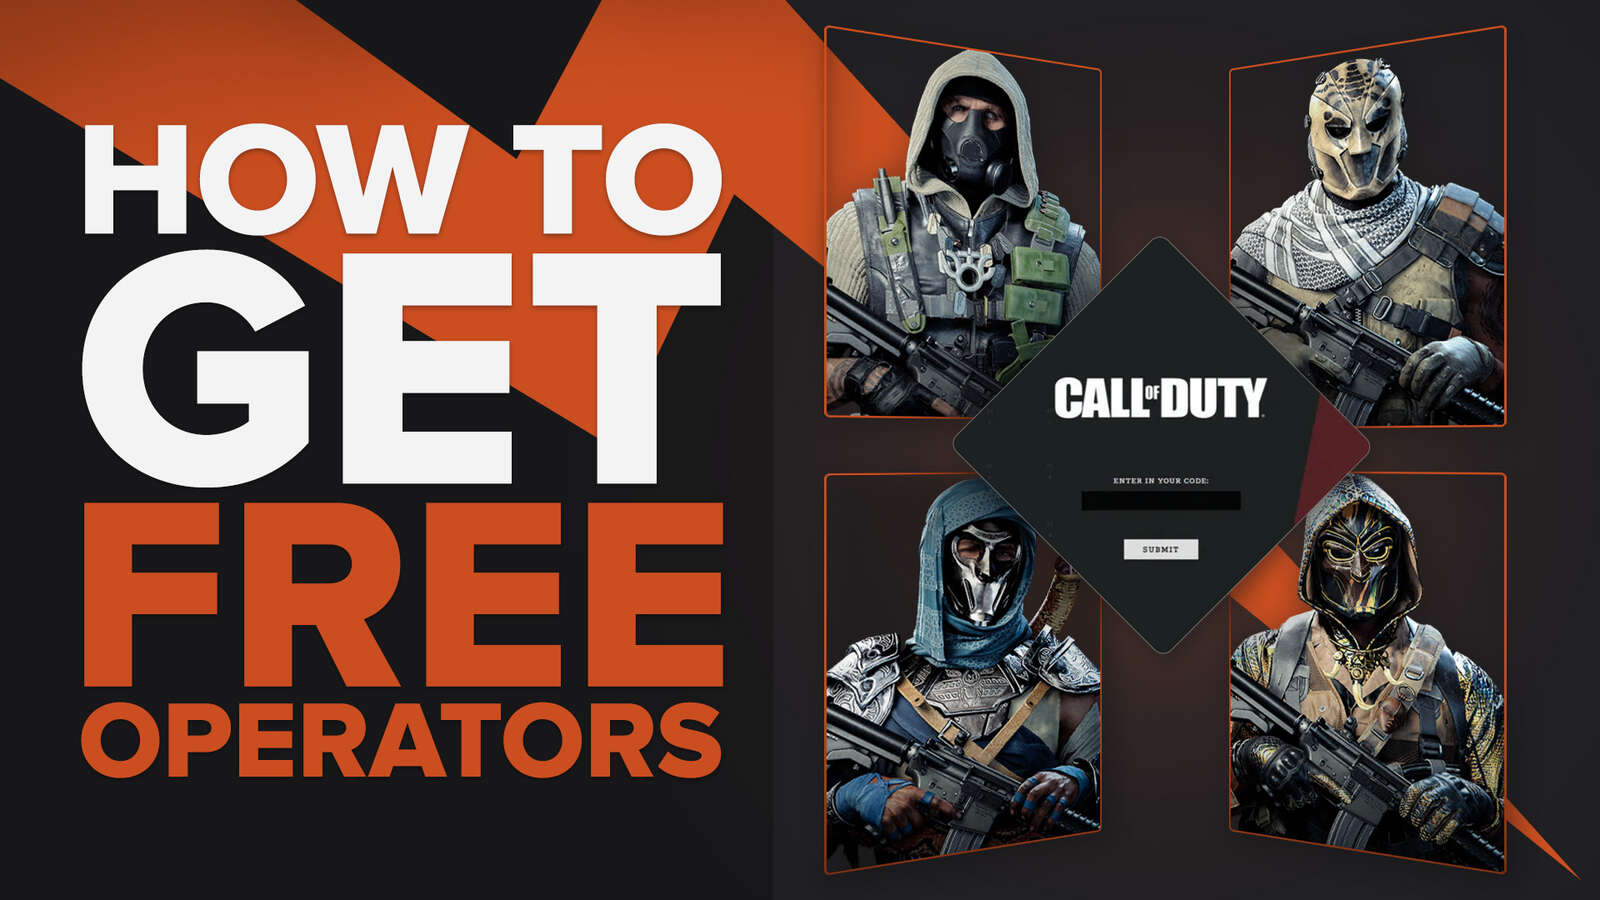 Call Of Duty Warzone: How To Get Free Operators (Legit ways)